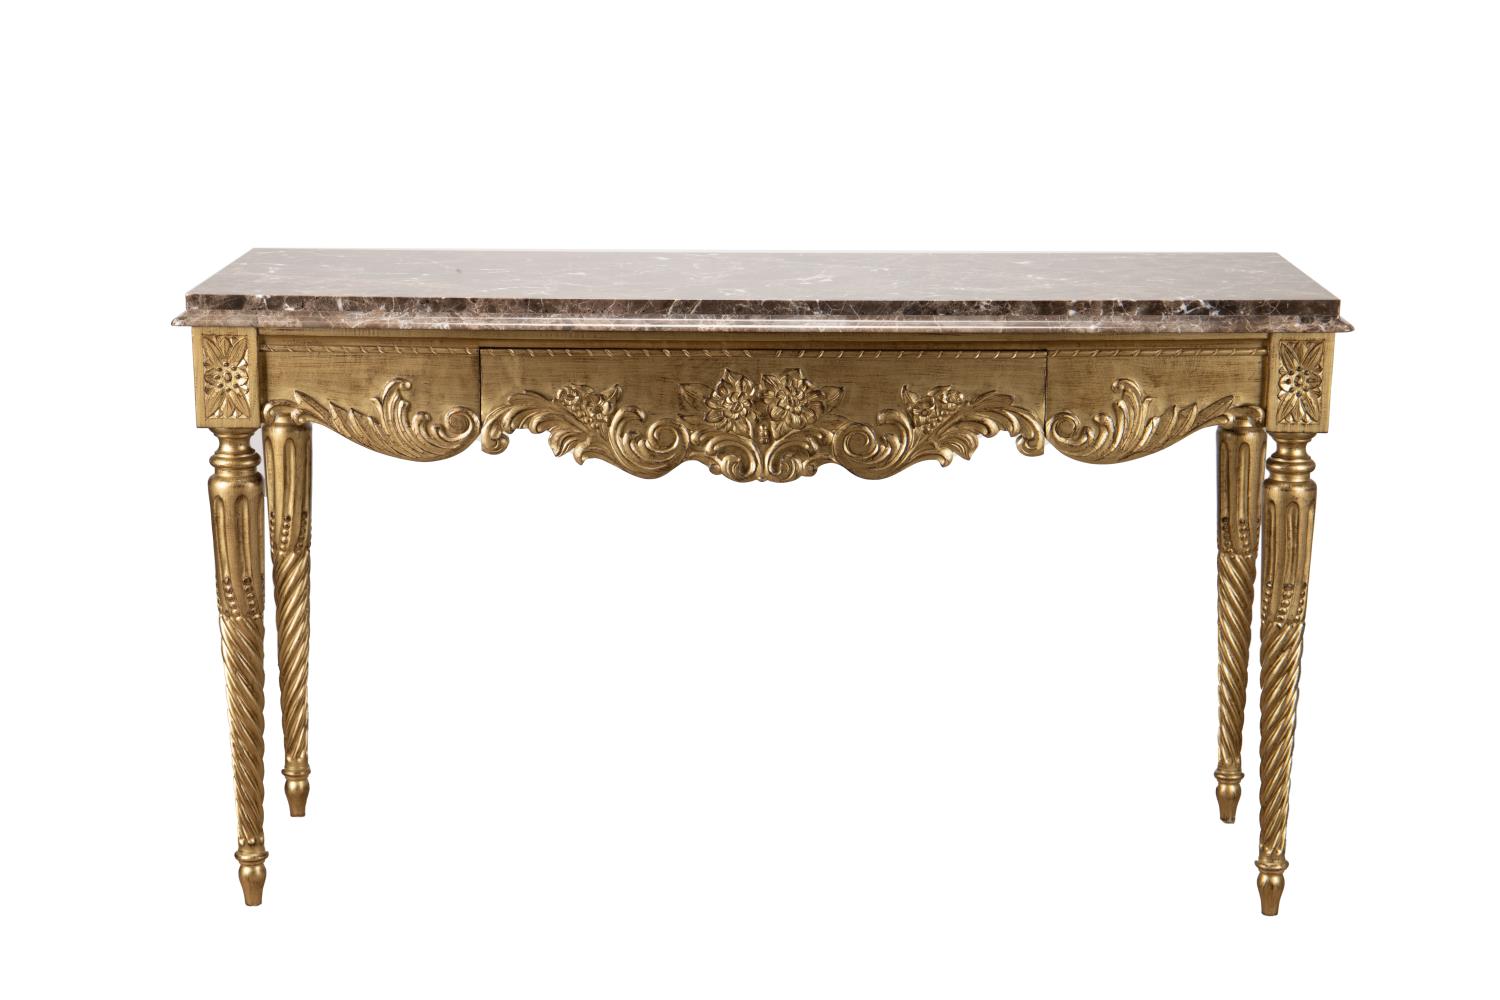 NEOCLASSICAL STYLE GILTWOOD CONSOLE 2fa4cd